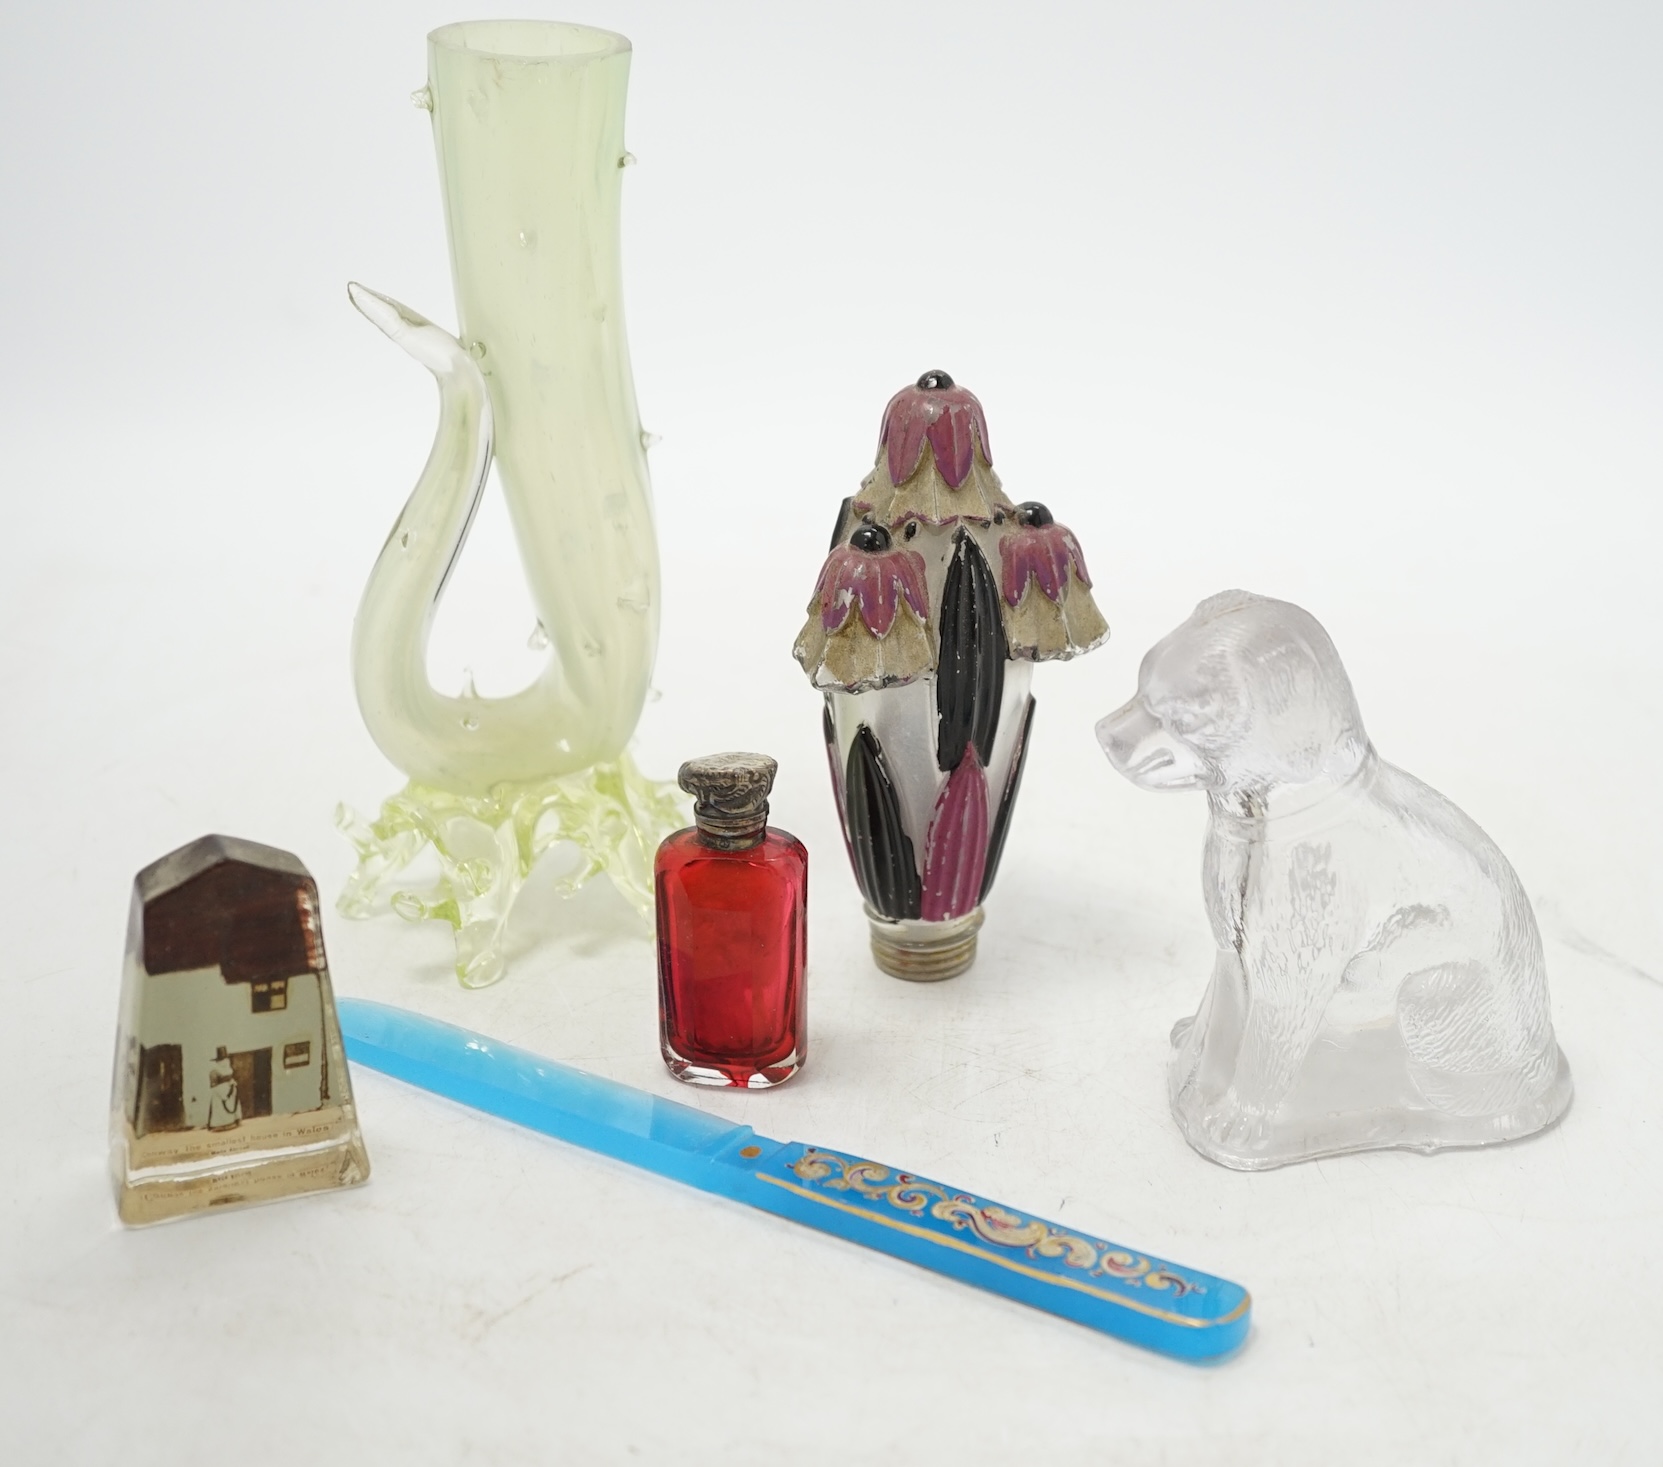 A collection of mixed Victorian glass perfume bottles and files, souvenir paperweights, a glass letter opener and vase, etc. Condition - fair to good